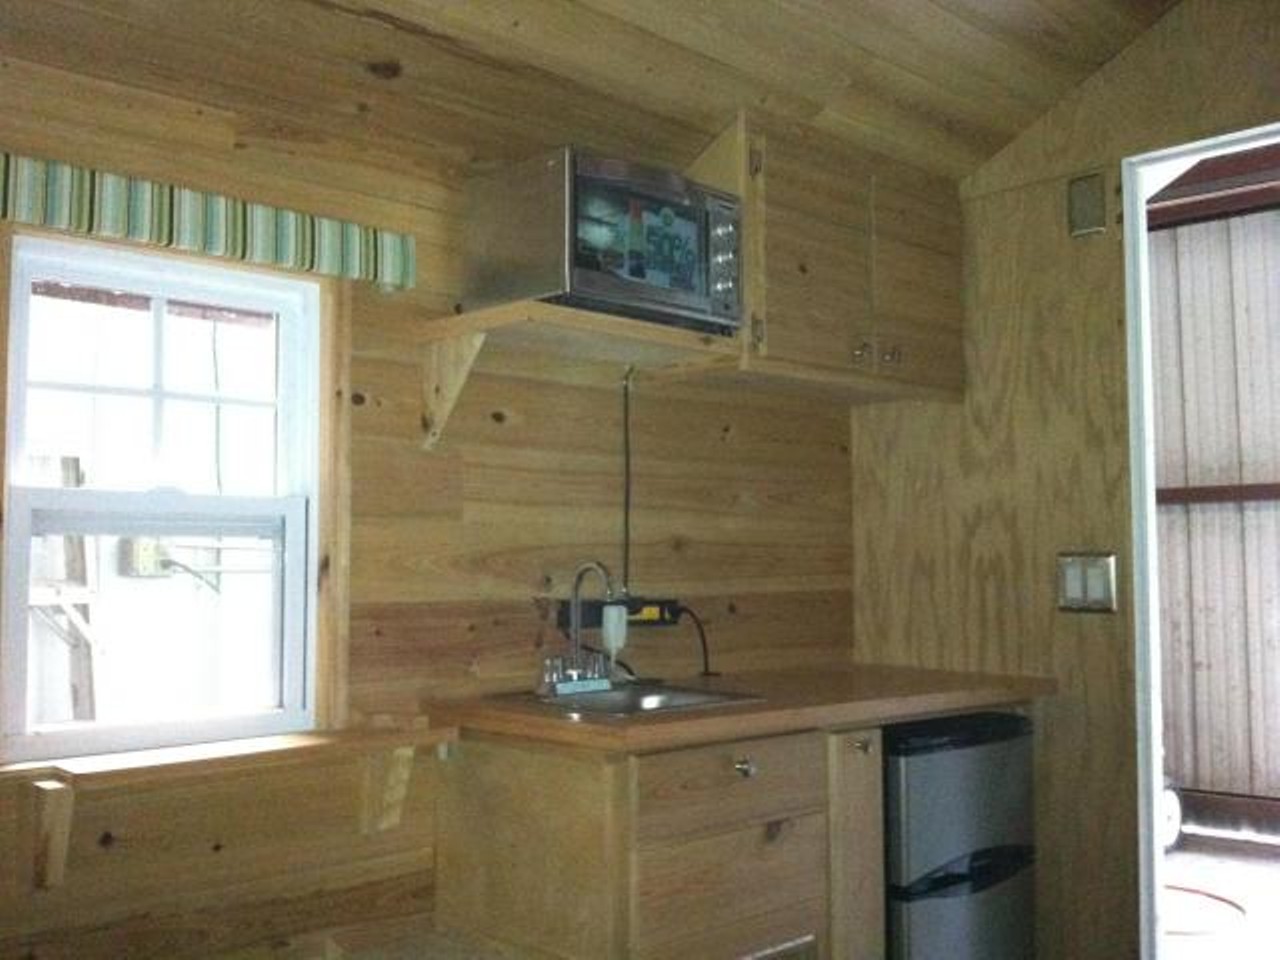 Aqua Tiny House
Location: Eustis
Price: $15000
Size: 70 sq ft
The full kitchen has everything you need.